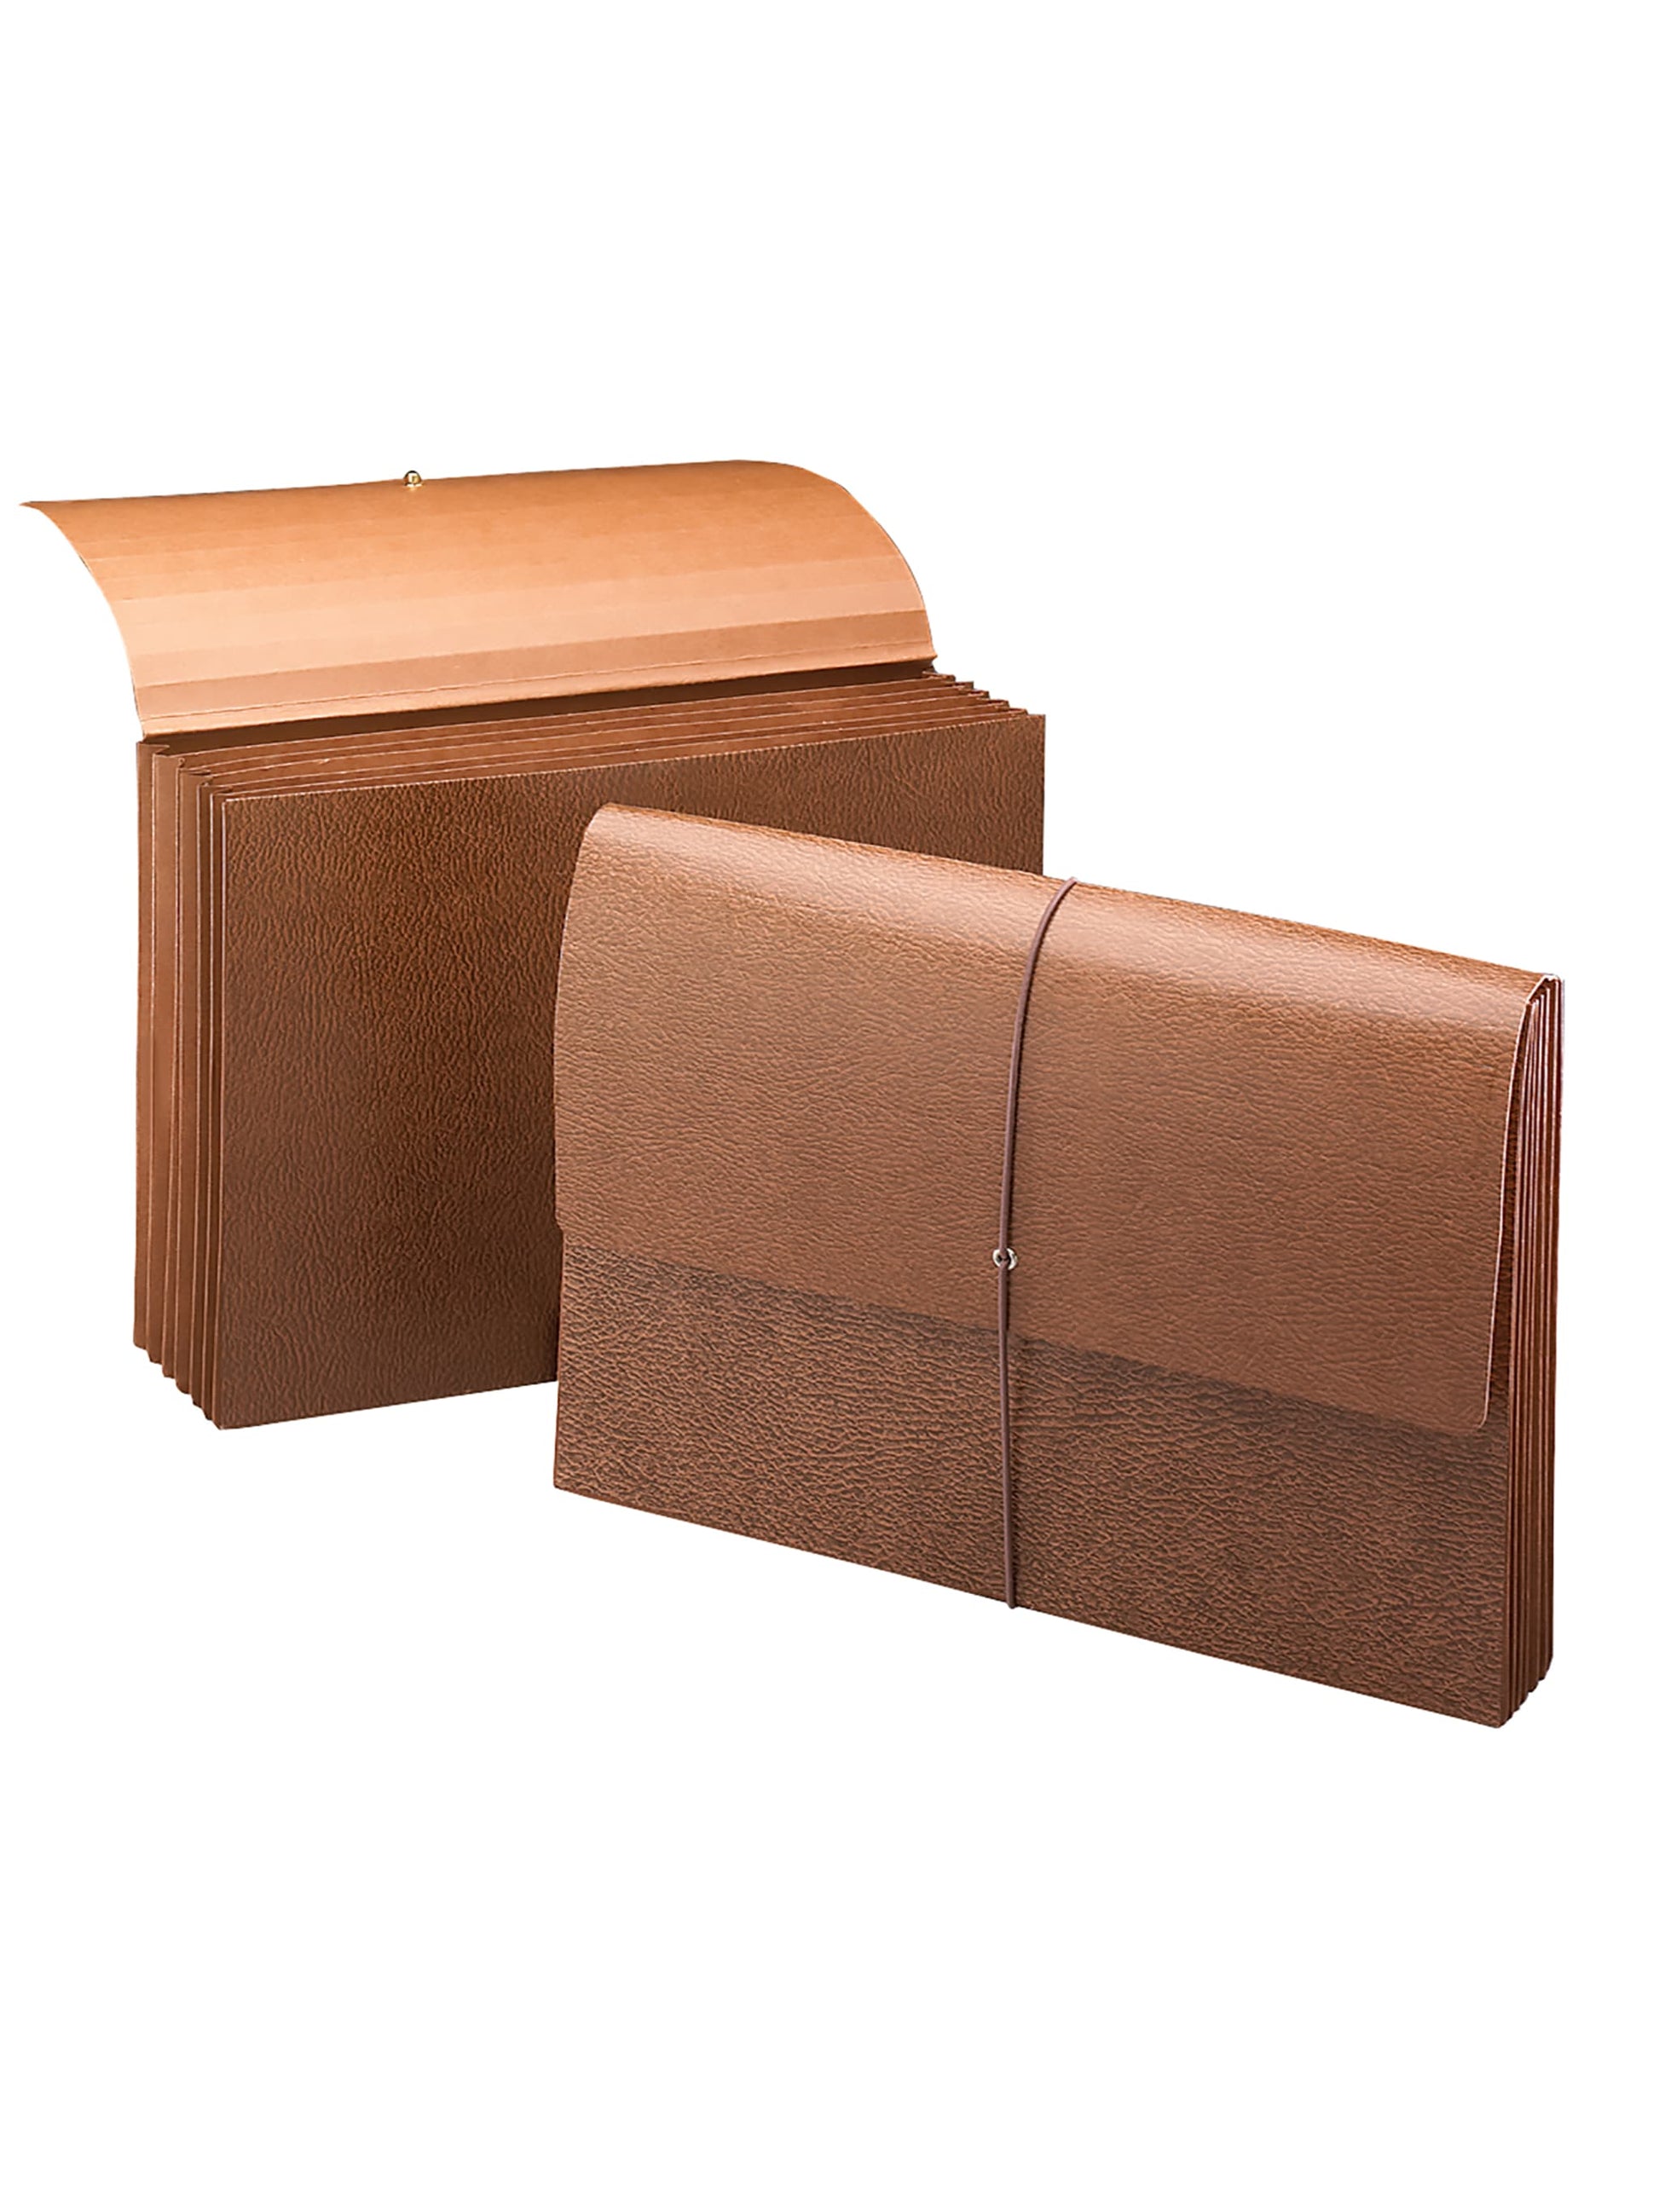 Redrope-Printed Partition Wallets with Elastic Cord, Brown Color, Legal Size, Set of 0, 30086486723757